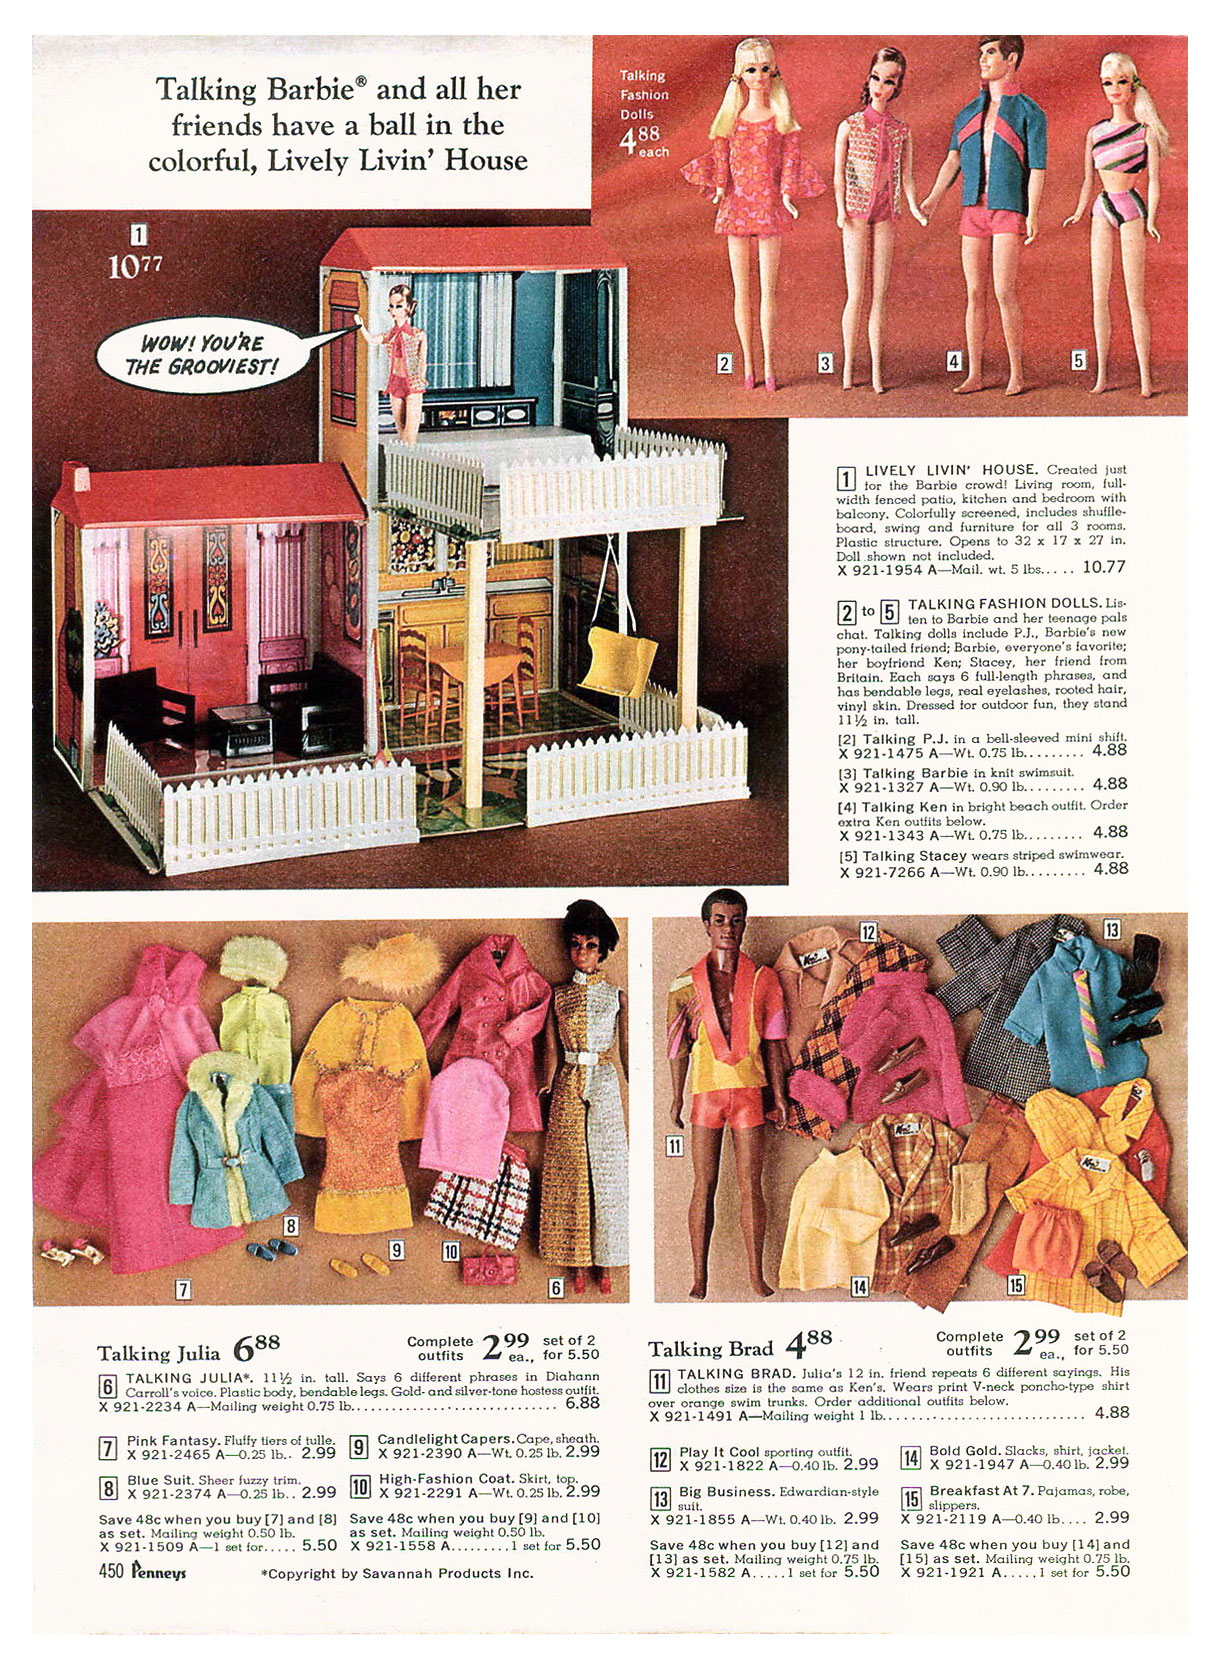 From 1970 JCPenney Christmas catalogue